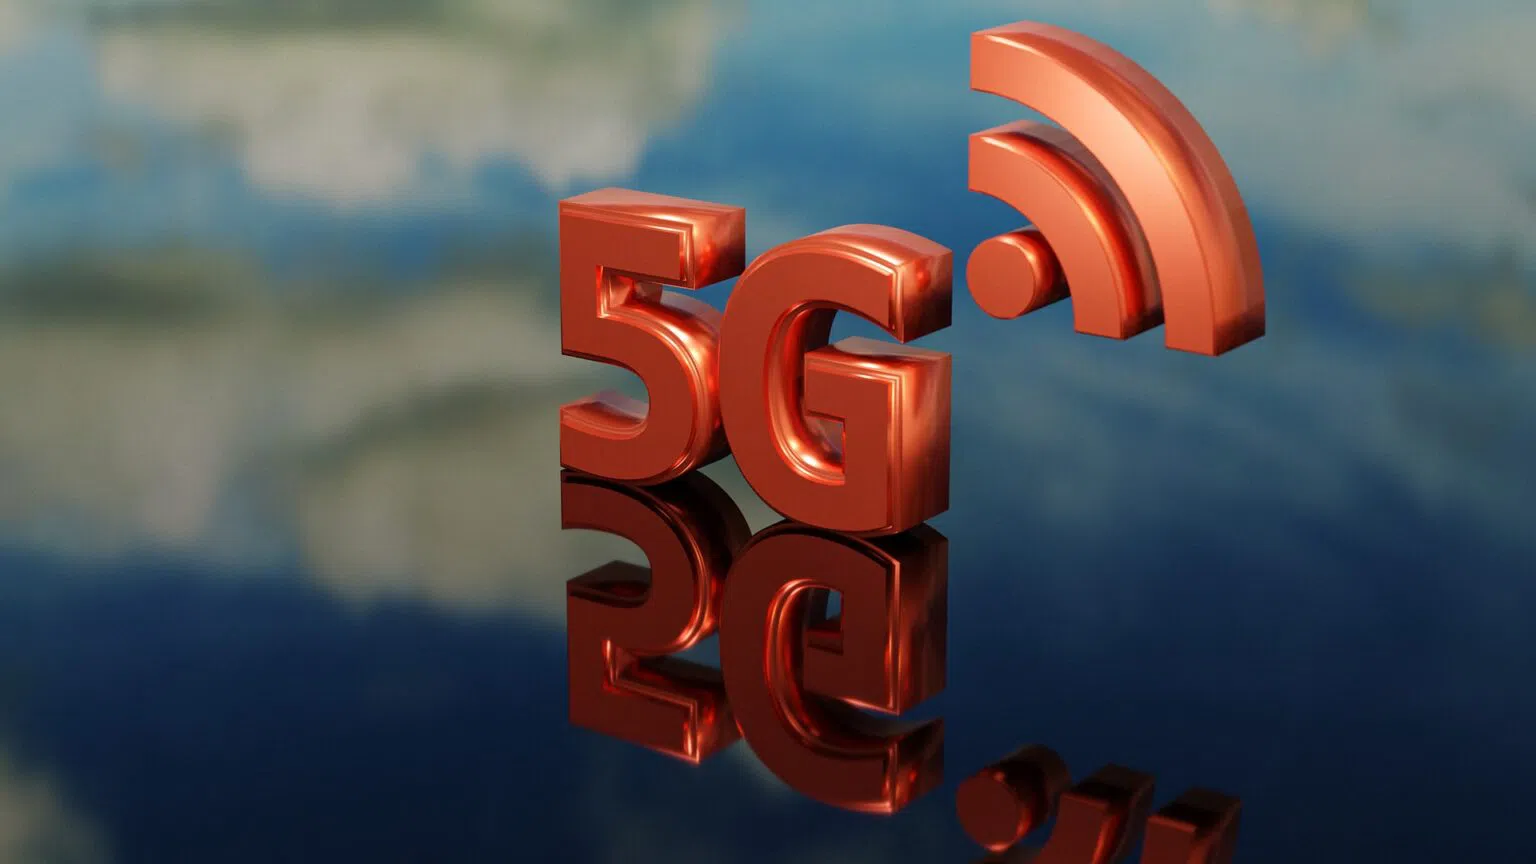 5G Connectivity Could Help Significantly Increase Energy Efficiency, Reduce Carbon Emissions in US